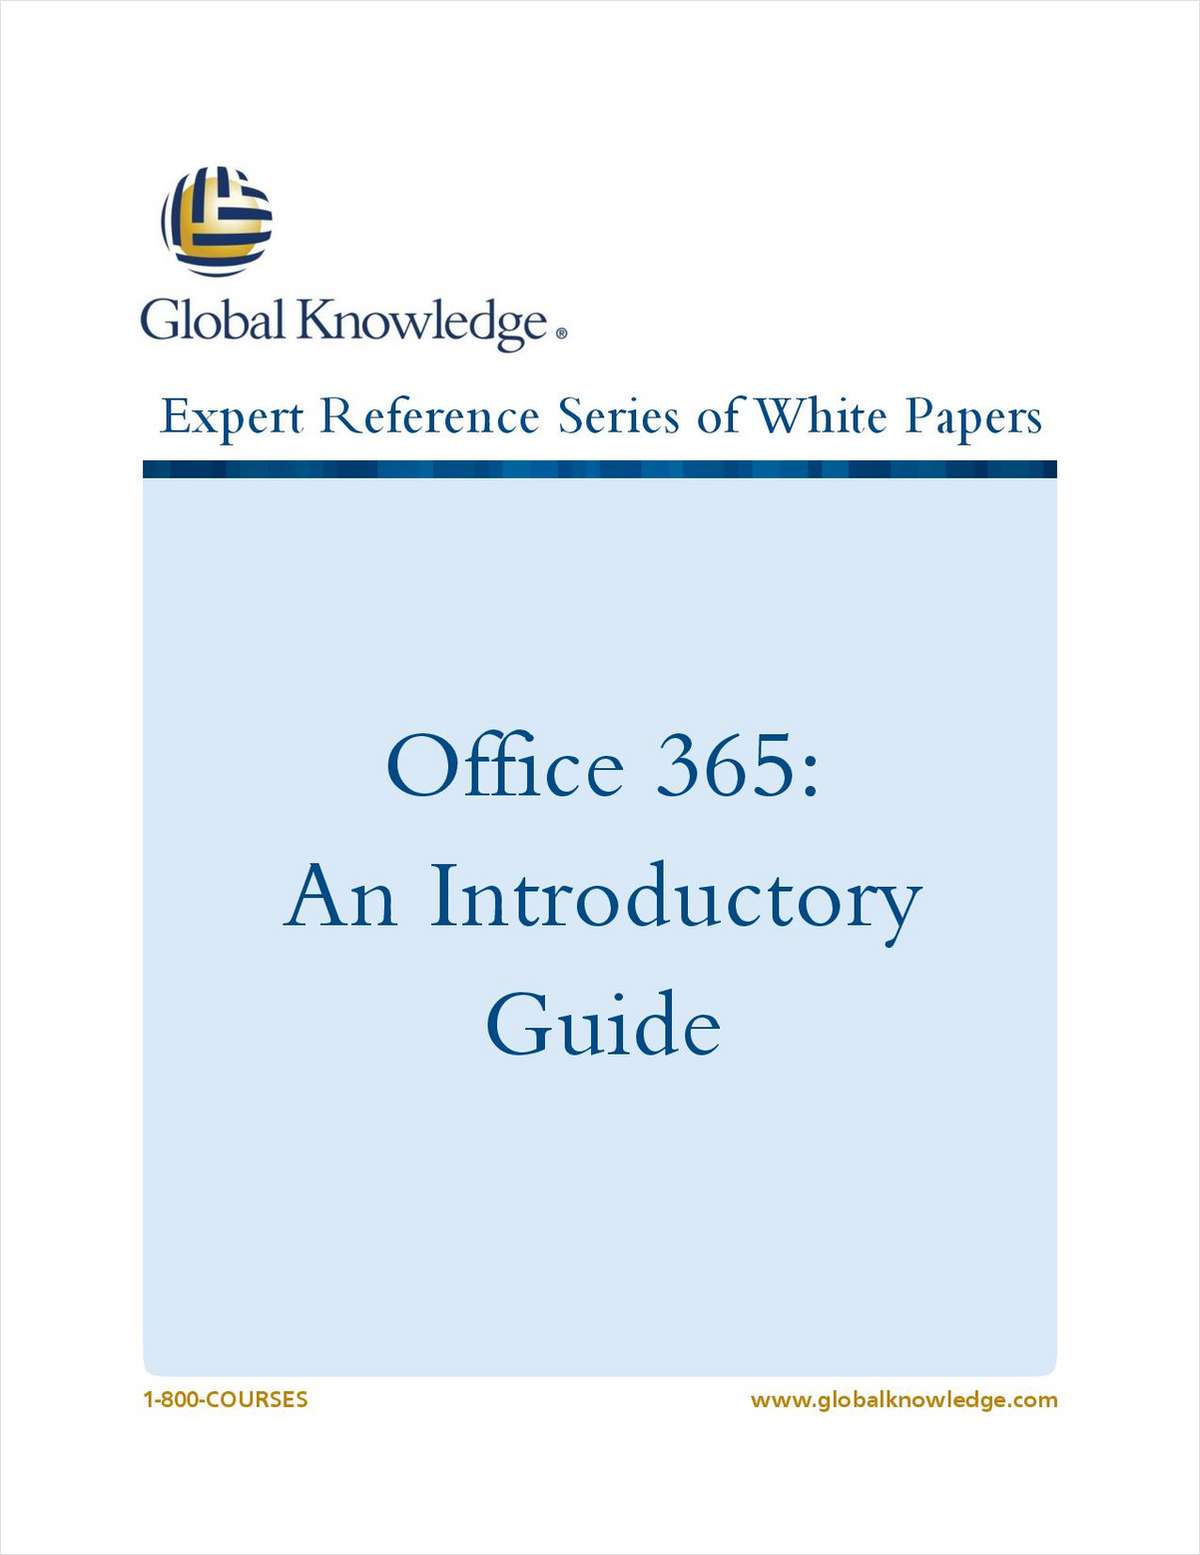 Office 365: An Introductory Guide